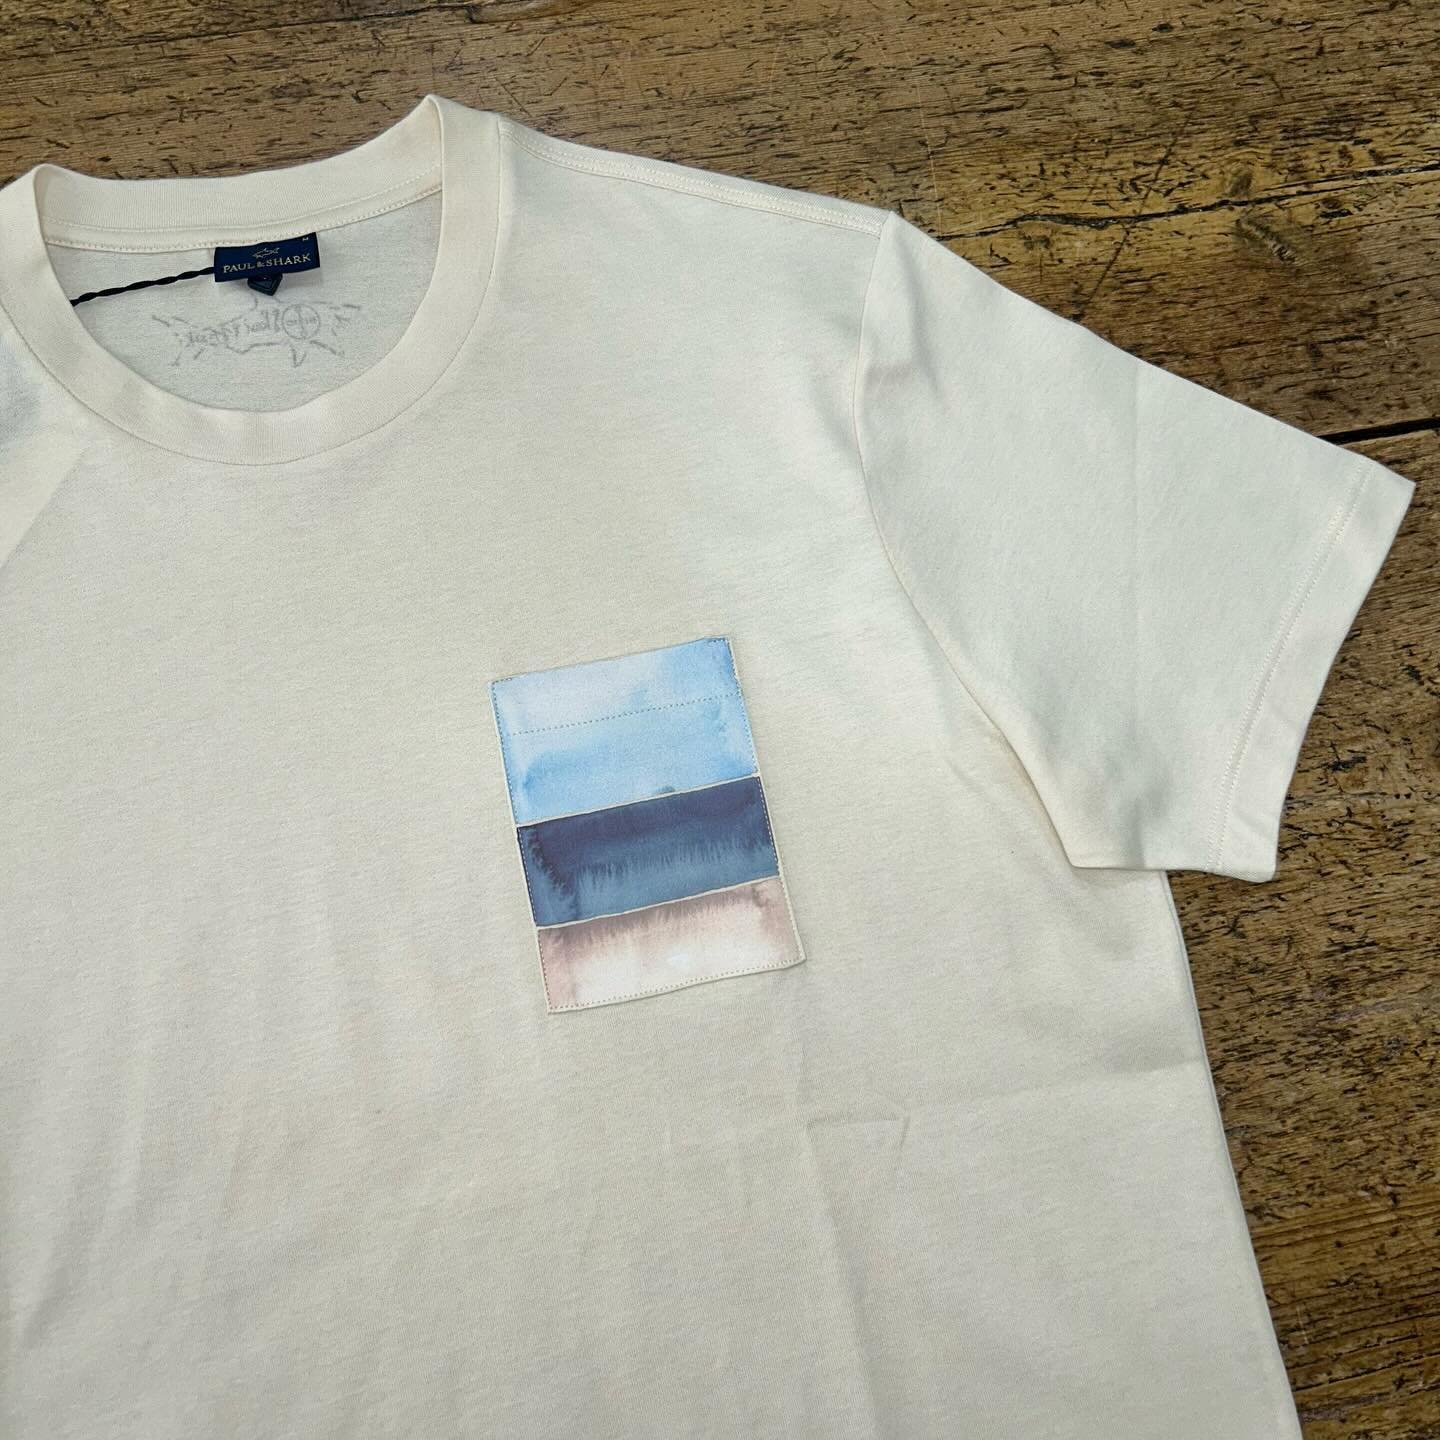 Paul &amp; Shark embraces art with its capsule collection that highlights the works of artist Bixio Braghieri, made from luxury cotton and limited to 100 pieces this really is the T-shirt for the man with everything.

#paulandshark #yachting #limited